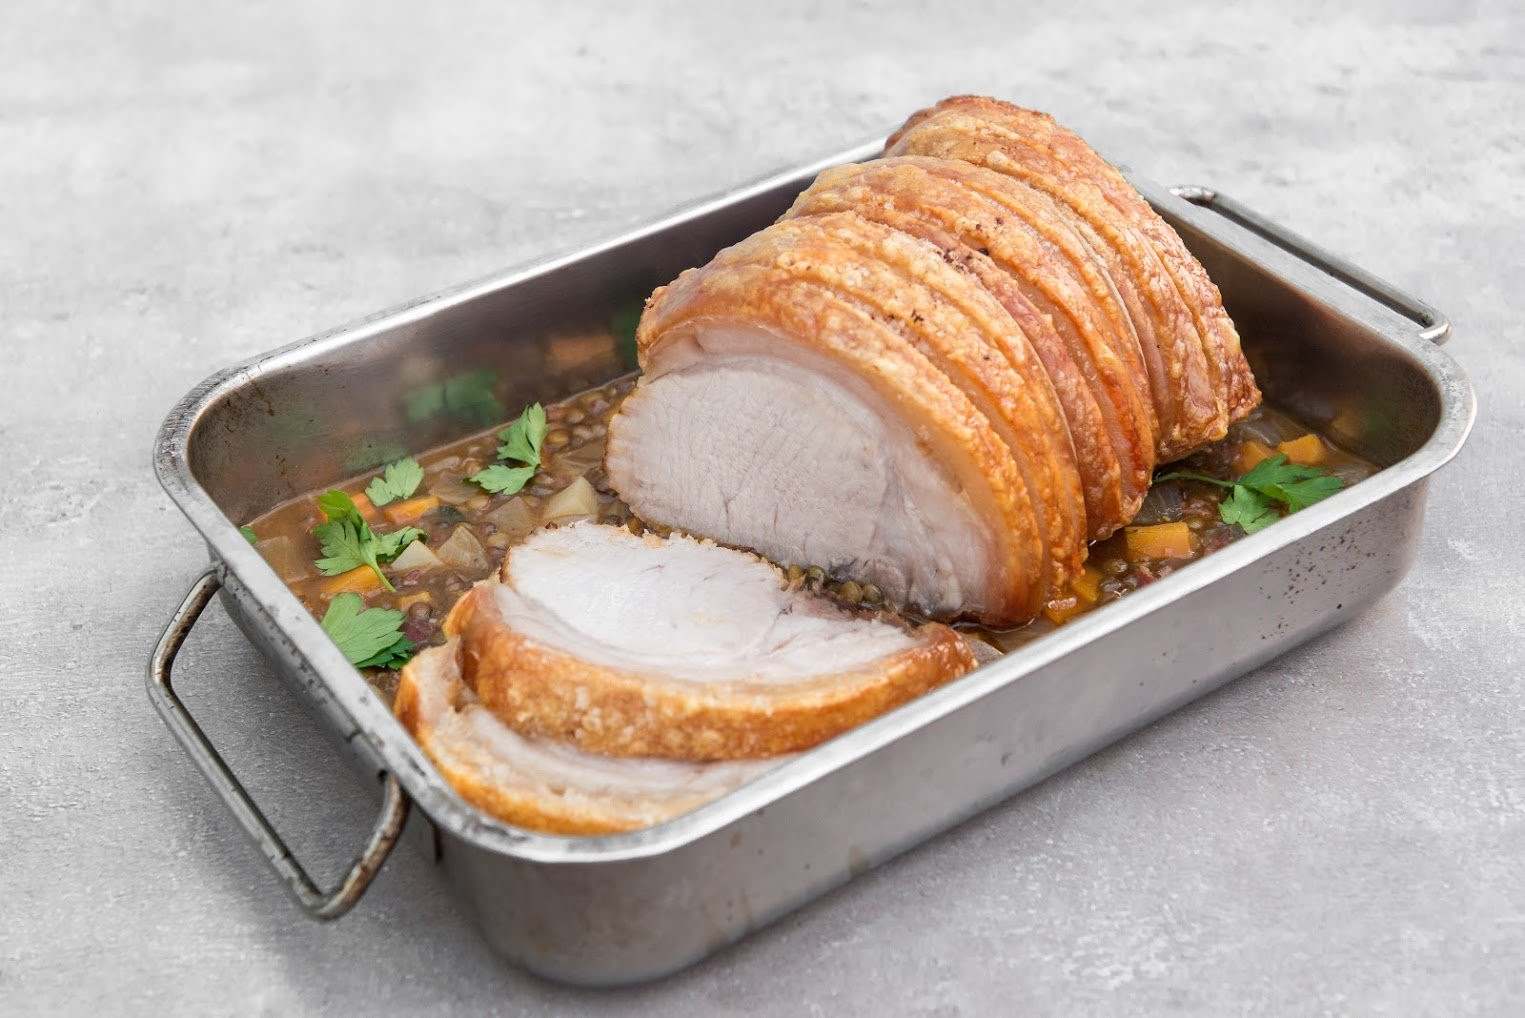 How To Cook A Pork Loin Roast
 How To Cook Roast Pork Loin with Aromatic Lentils